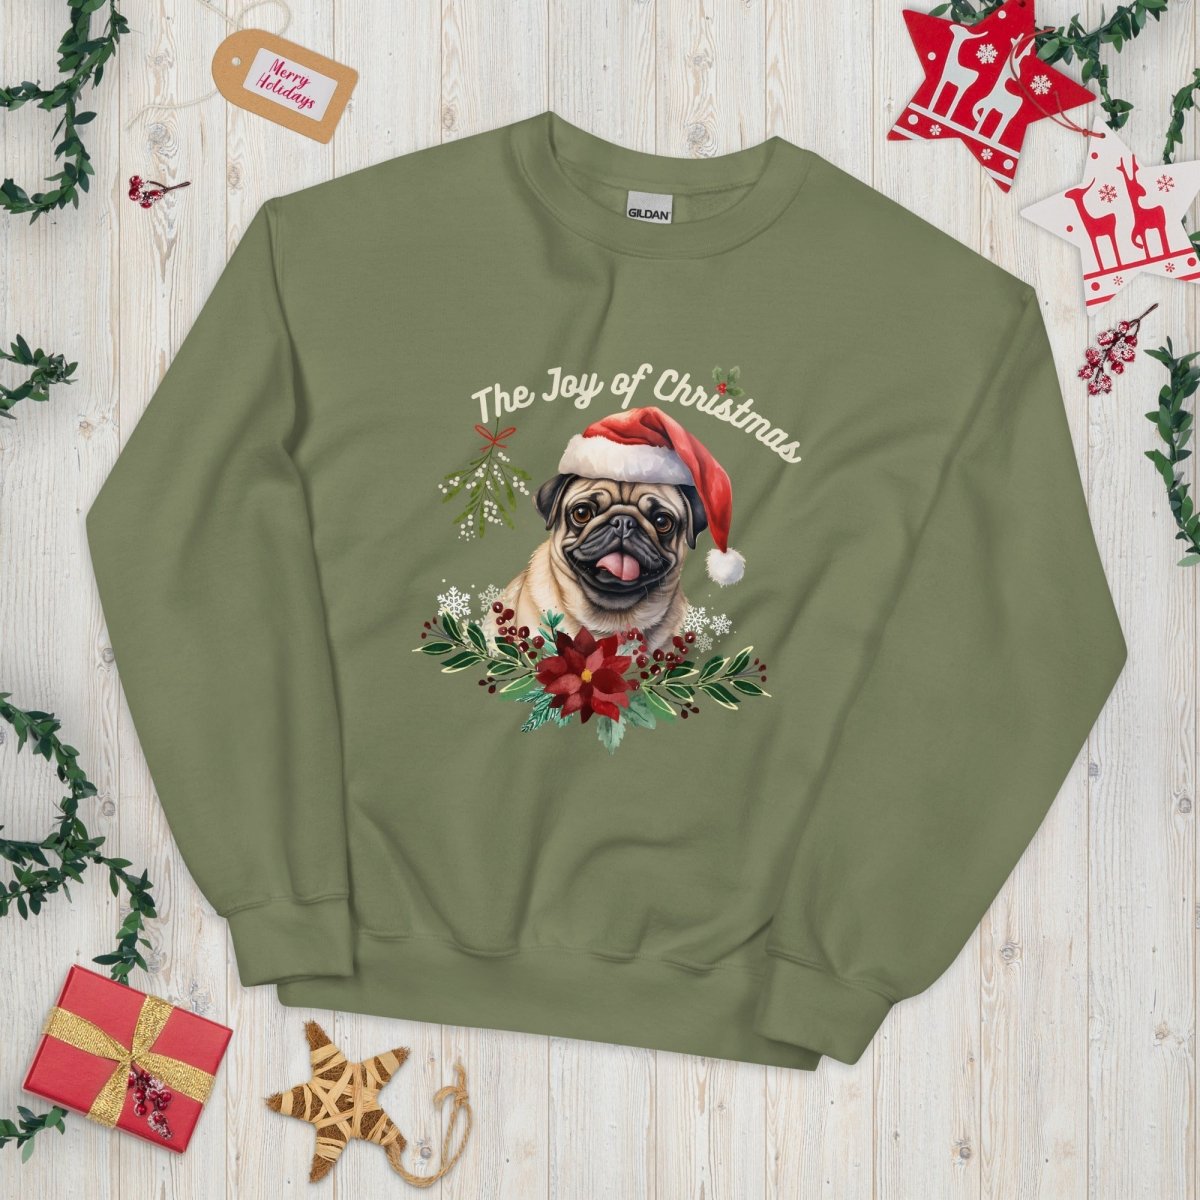 Christmas Pug Pullover - High Quality Festive Family Unisex Sweater, Gift for Her, Gift for Doglovers, Funny Xmas Sweater, Cute Xmas Dog - Everything Pixel